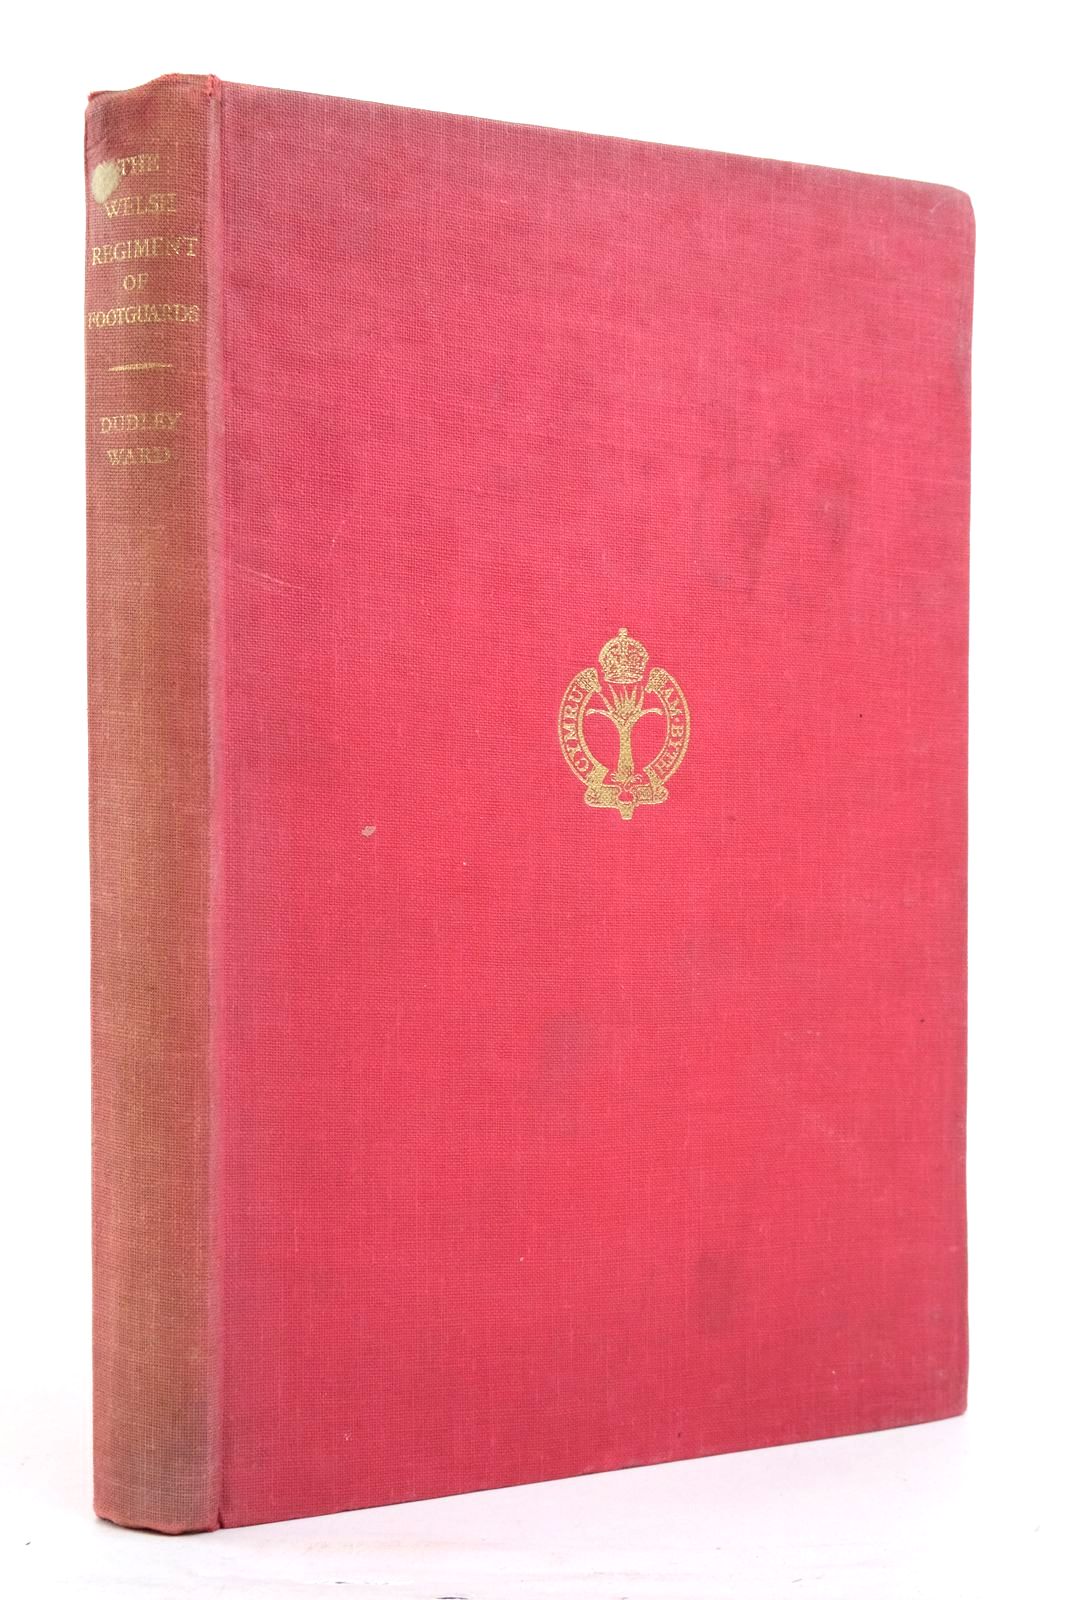 Photo of THE WELSH REGIMENT OF FOOT GUARDS 1915-1918 written by Ward, C. Dudley published by John Murray (STOCK CODE: 2137546)  for sale by Stella & Rose's Books